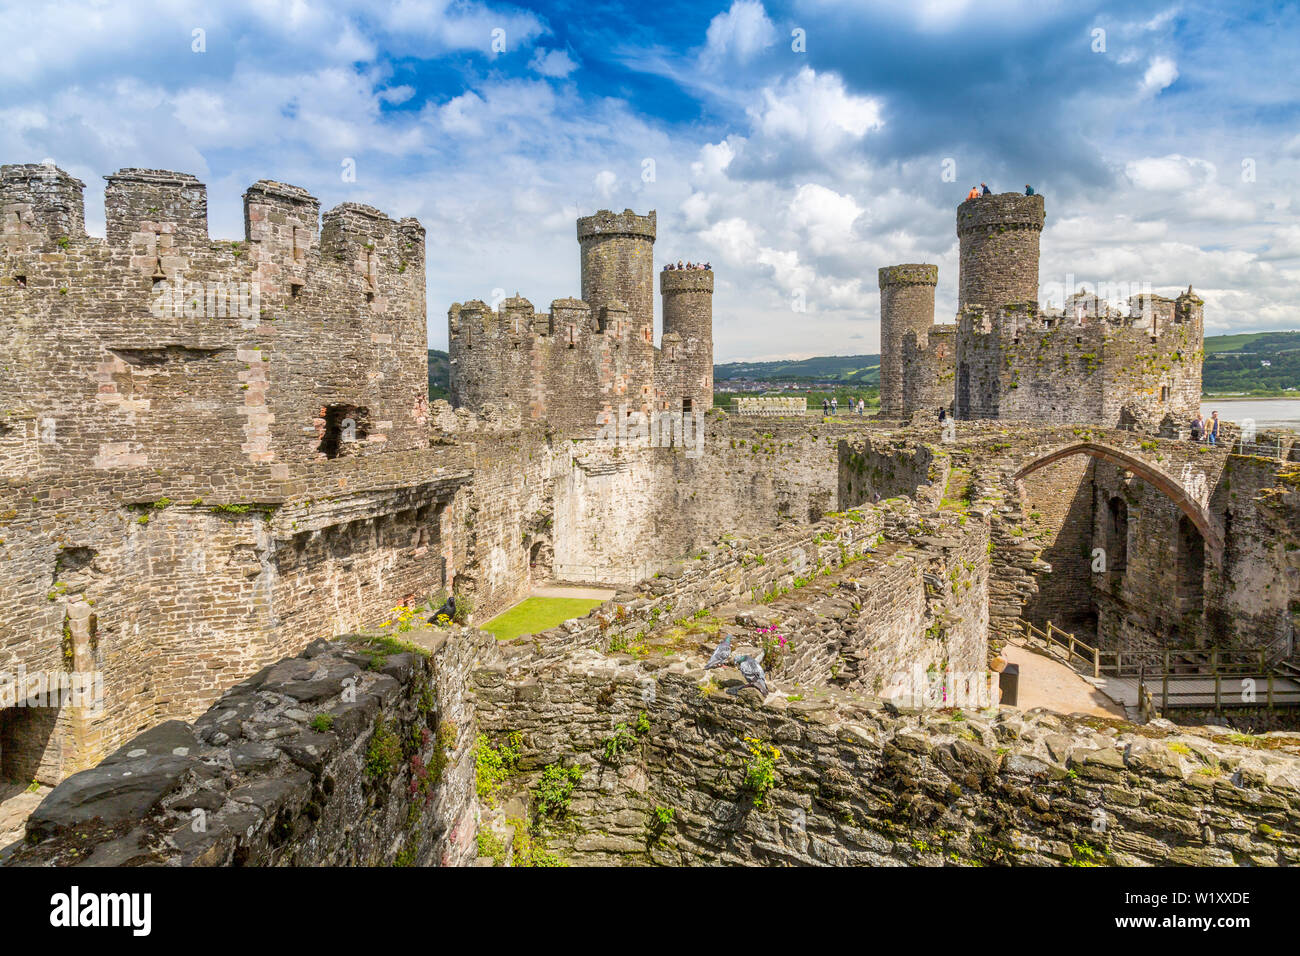 The ruins of the 13th century Great  Hall and Chapel in Conwy Castle are now a World Heritage Site and popular tourist attraction, Conwy Wales, UK Stock Photo